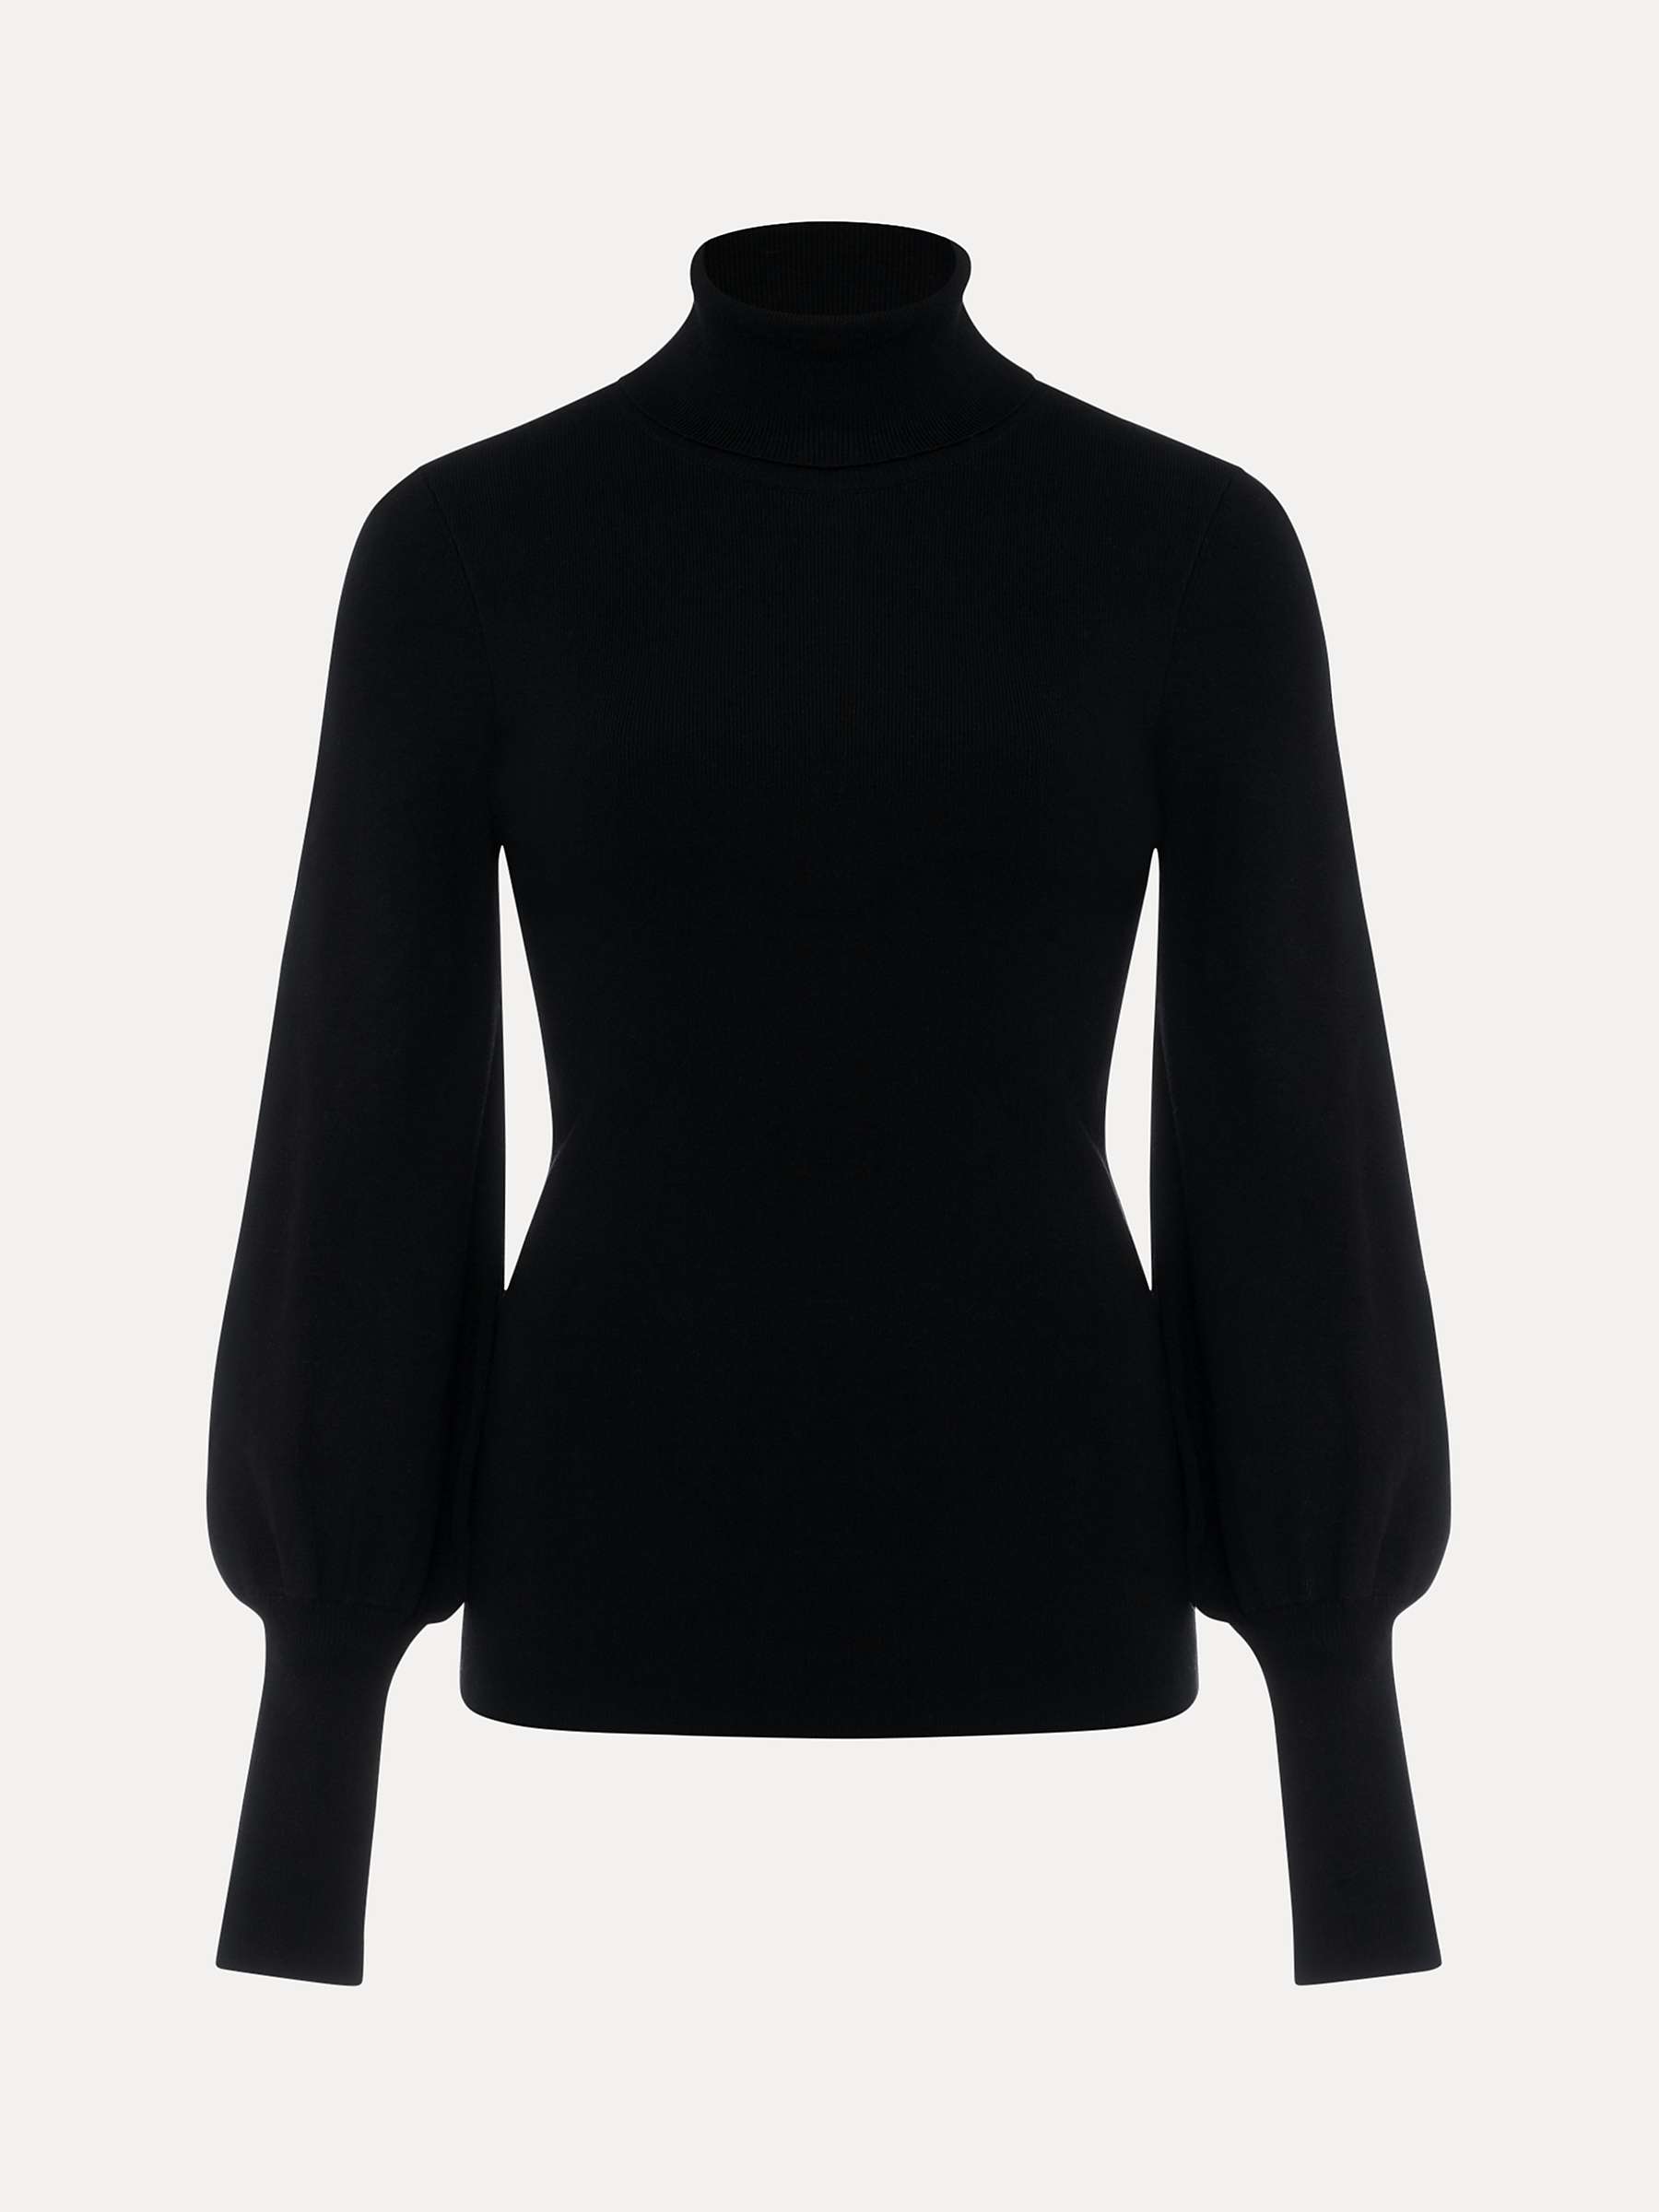 Buy Phase Eight Gwyneth Balloon Sleeve Top Online at johnlewis.com